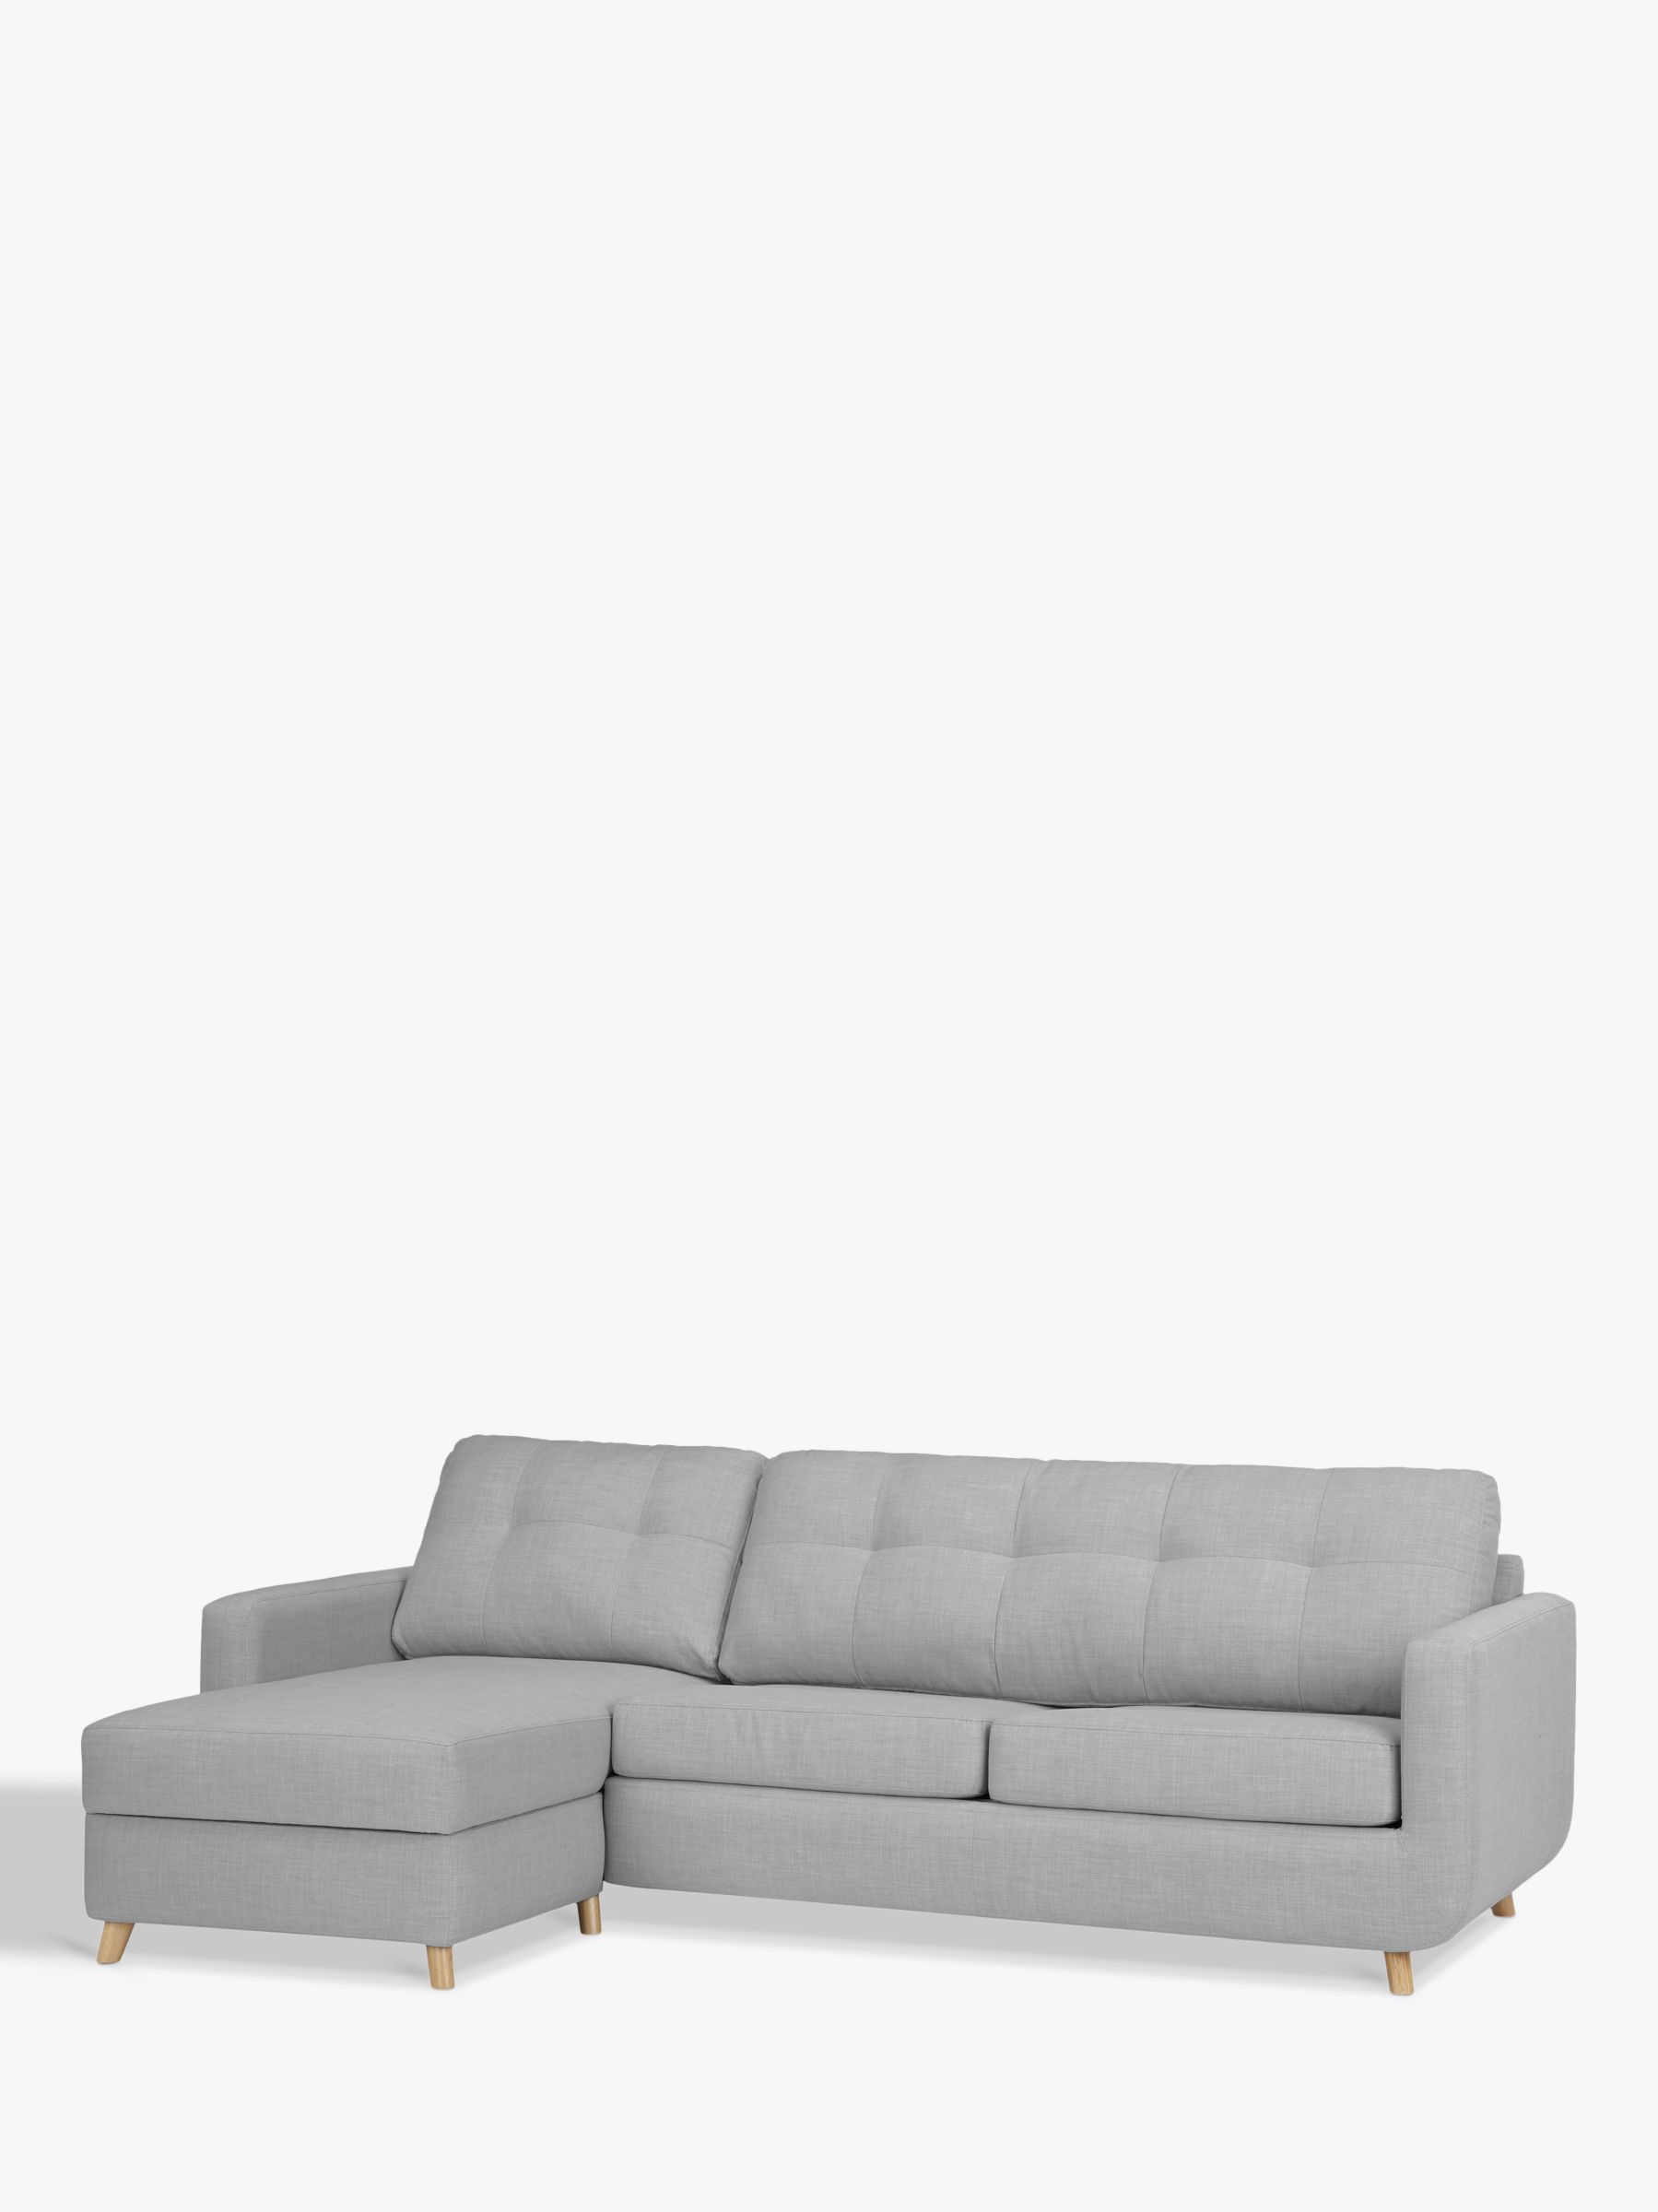 Photo of John lewis barbican lhf chaise sofa bed with storage